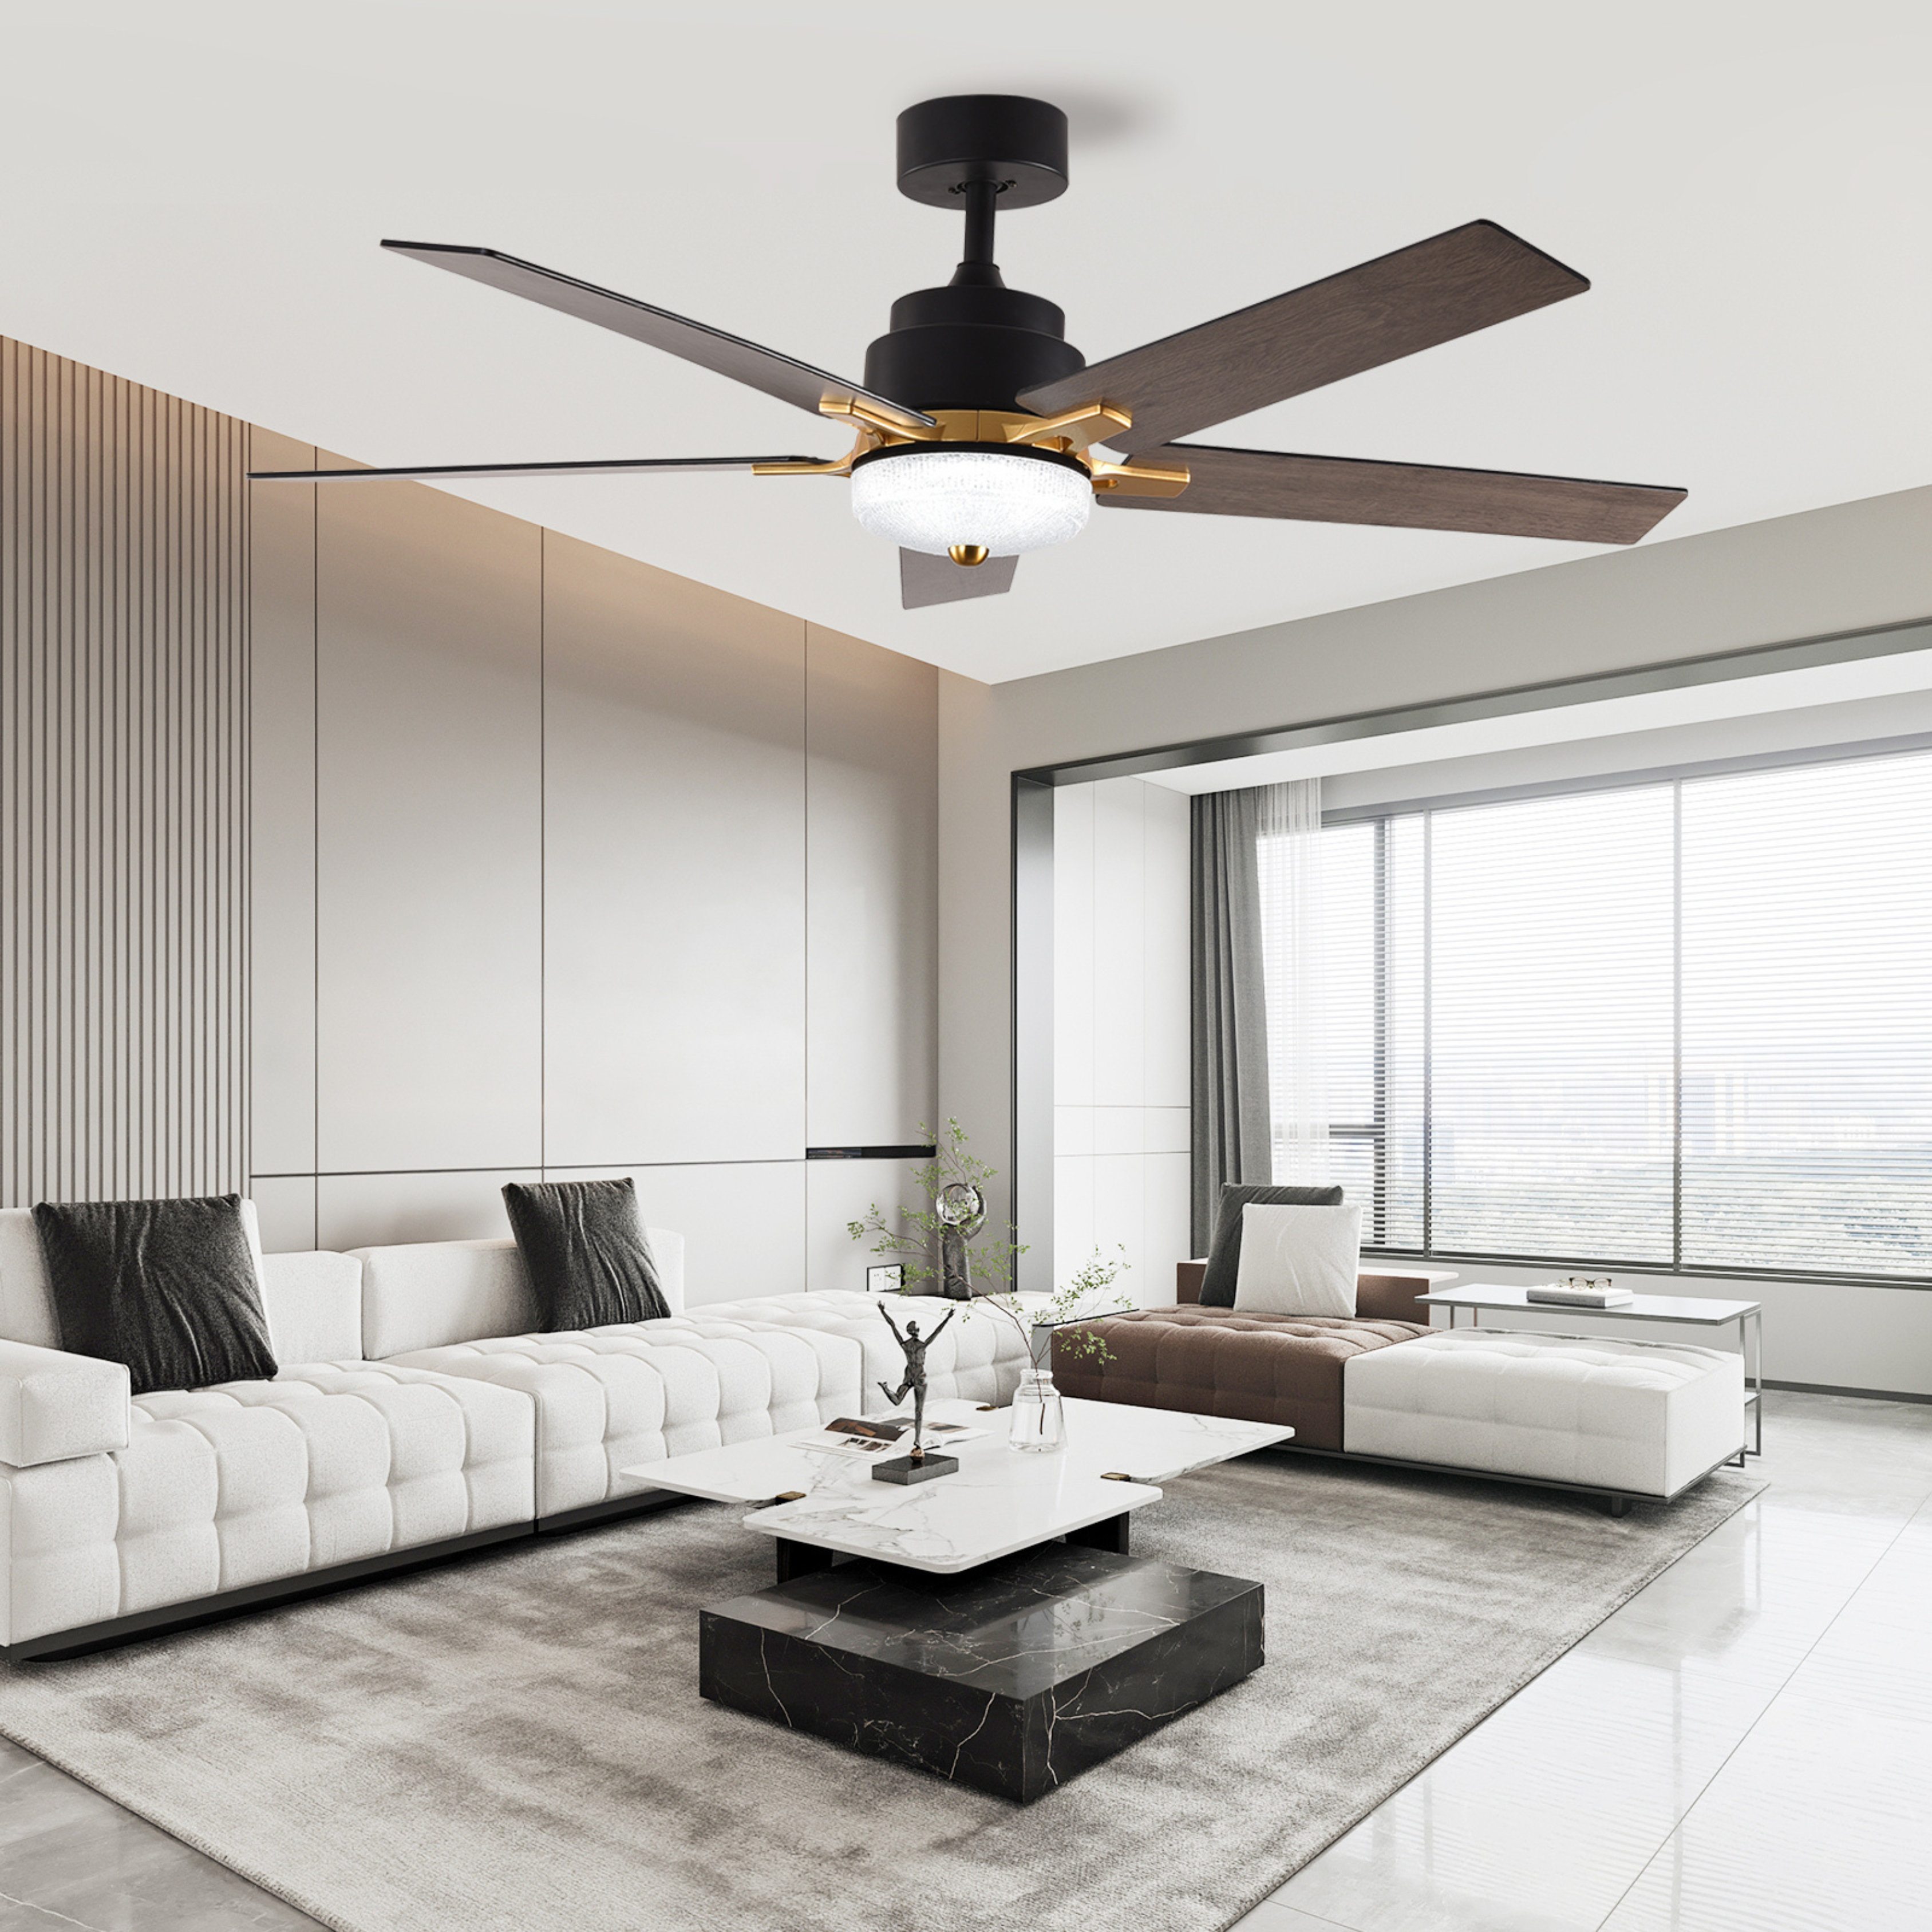 Emilo 52 Inch Downrod Modern 5 Blades Ceiling Fans with Lights Remote  Control for Bedroom, Living Room